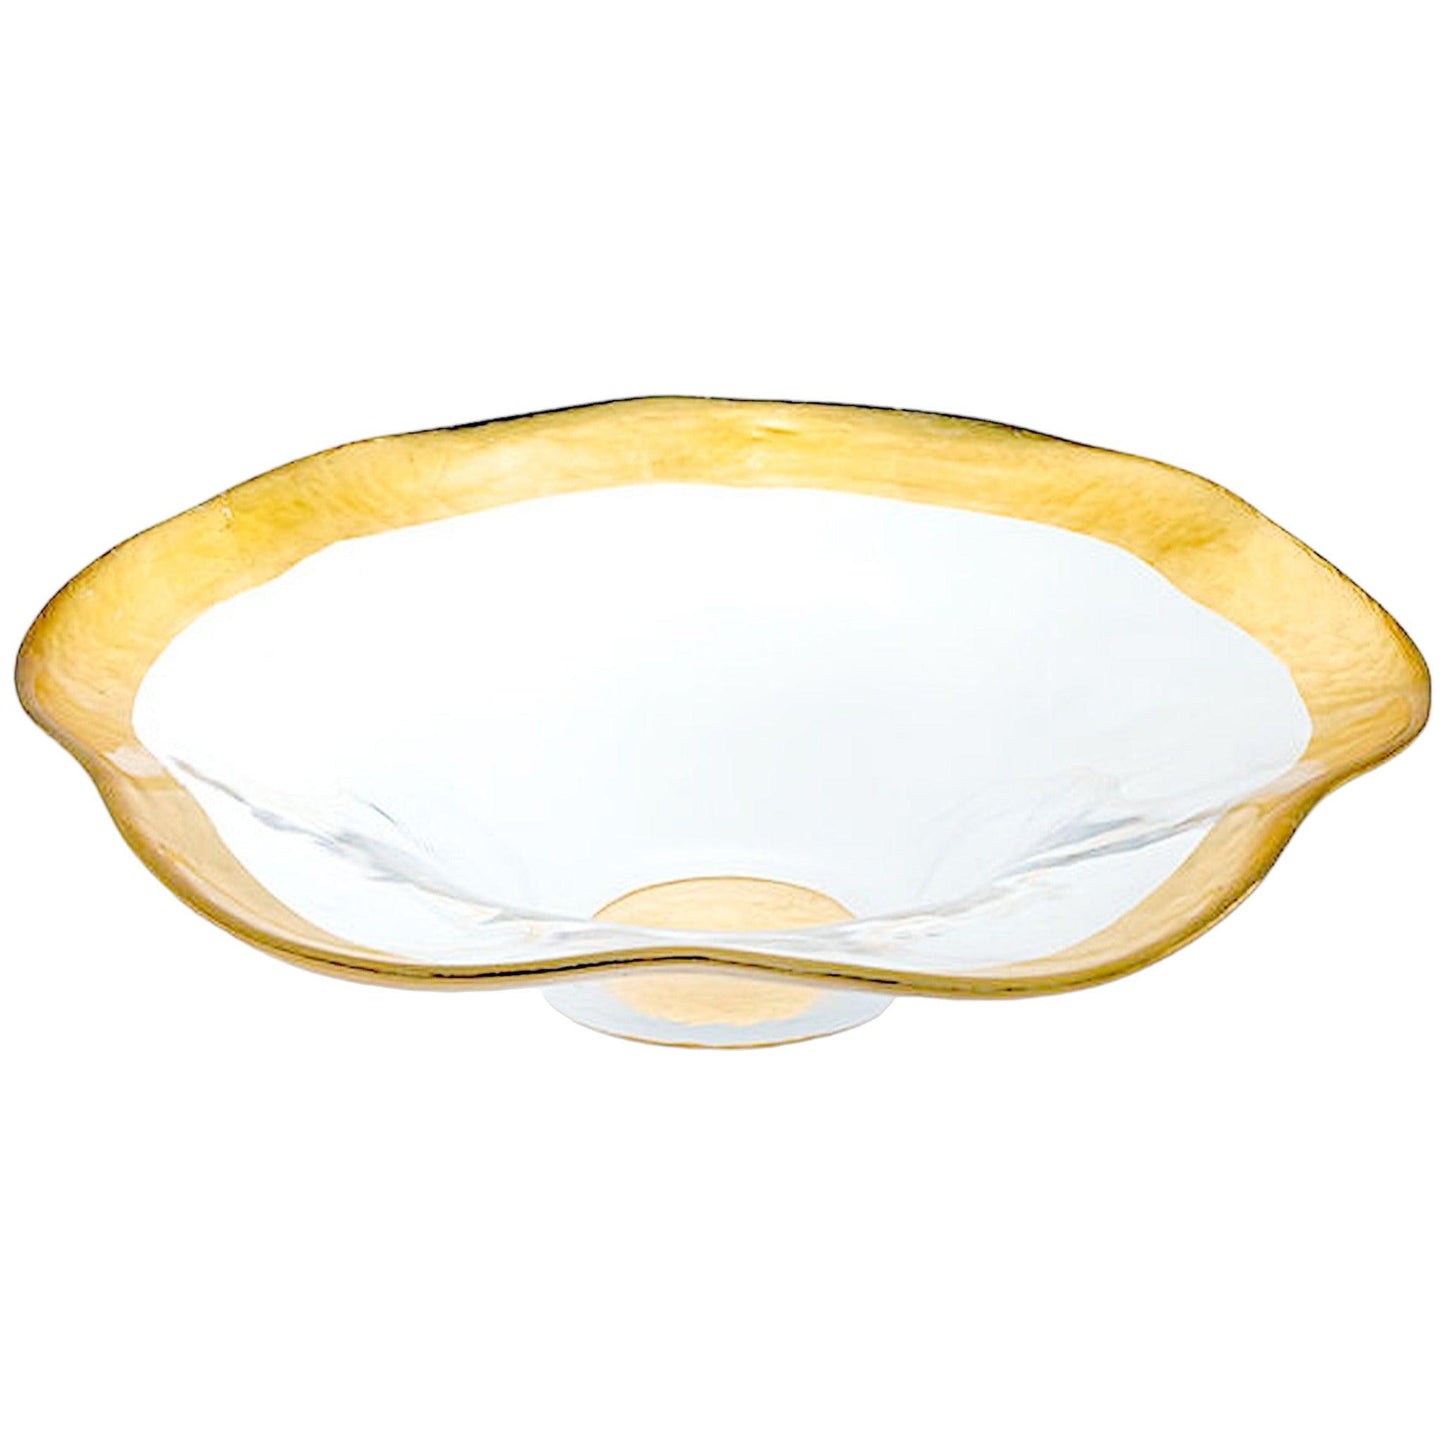 Genuine Gold Leaf Plated 8-inch Wave Bowl - Nature Home Decor